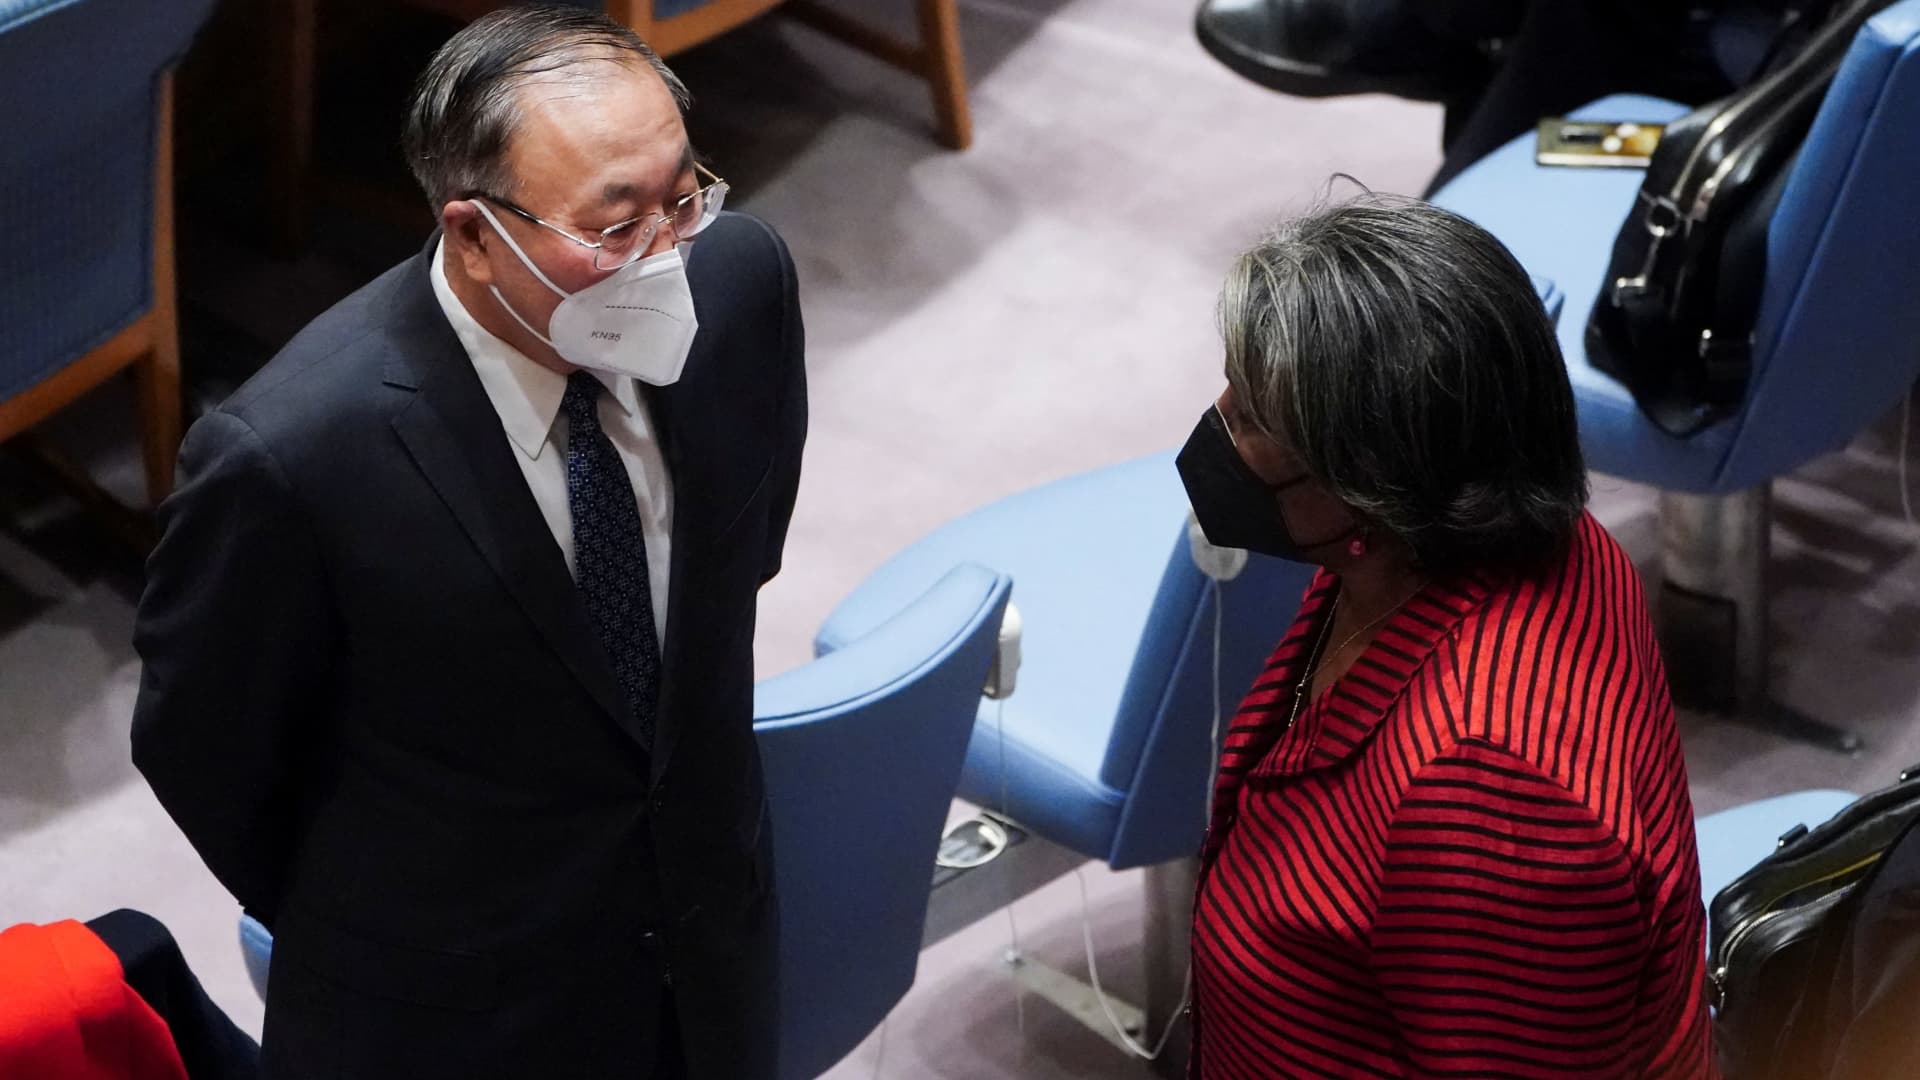 China's Ambassador to the U.N. Zhang Jun speaks with U.S. Ambassador to the U.N. Linda Thomas-Greenfield at the United Nations Security Council meeting on Threats to International Peace and Security, following Russia's invasion of Ukraine, in New York City, U.S. March 11, 2022.